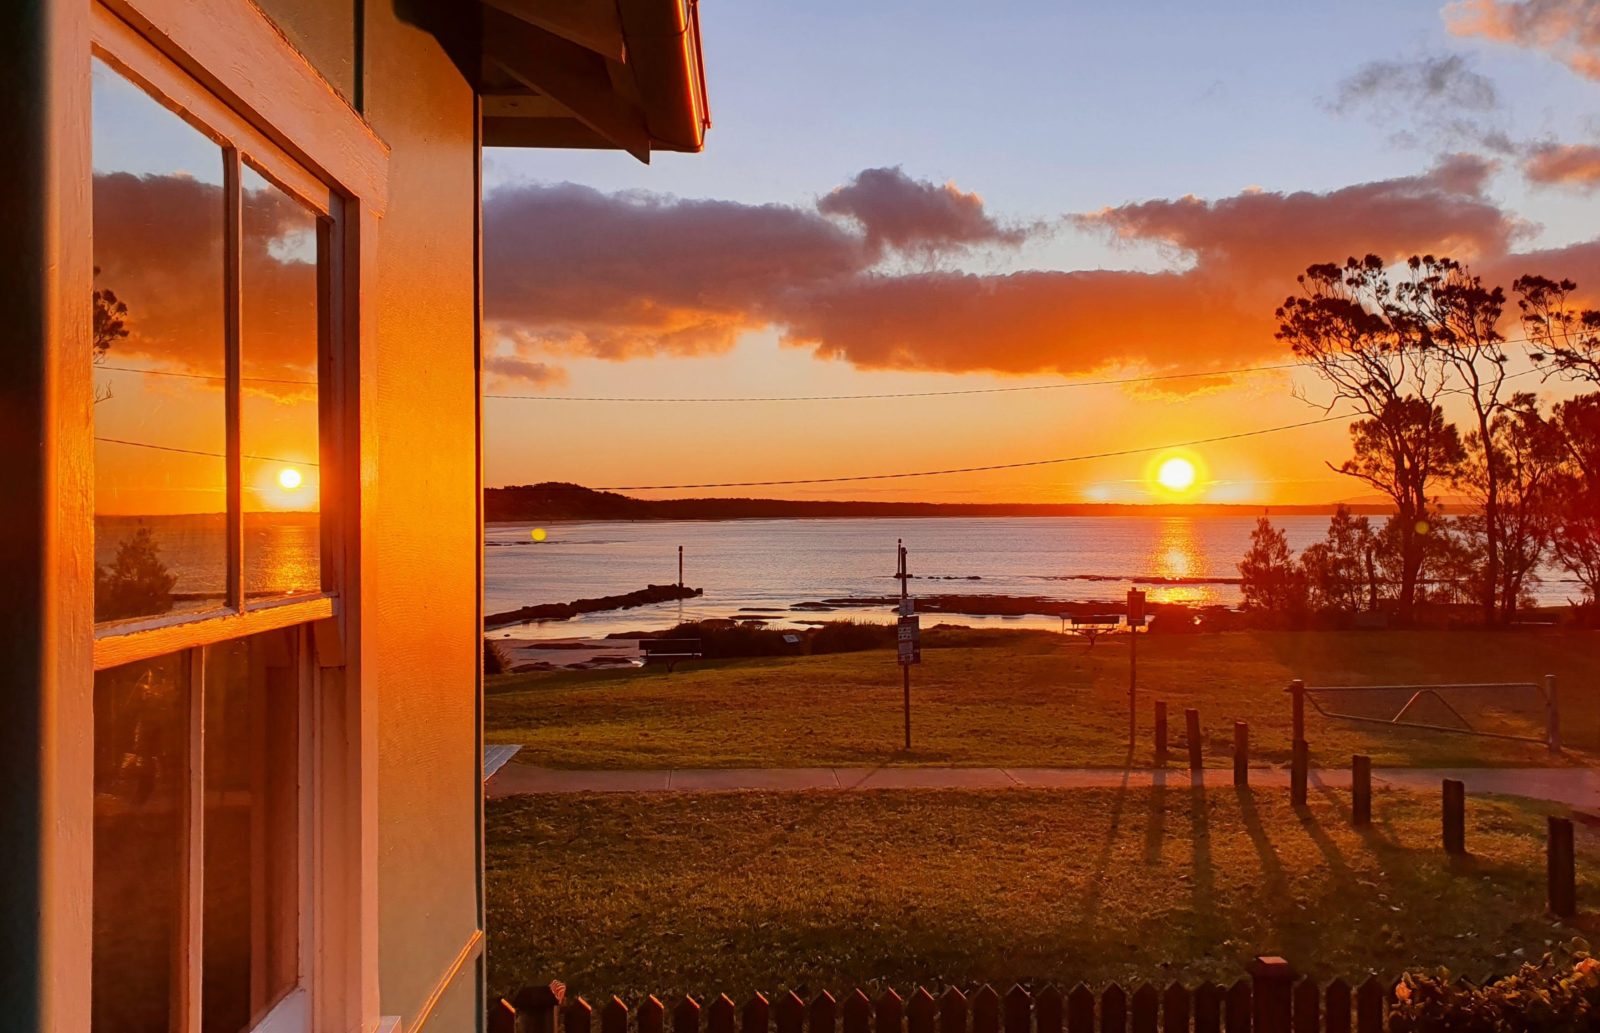 Sunset at Aurora Cottage overlooking Currarong Beach